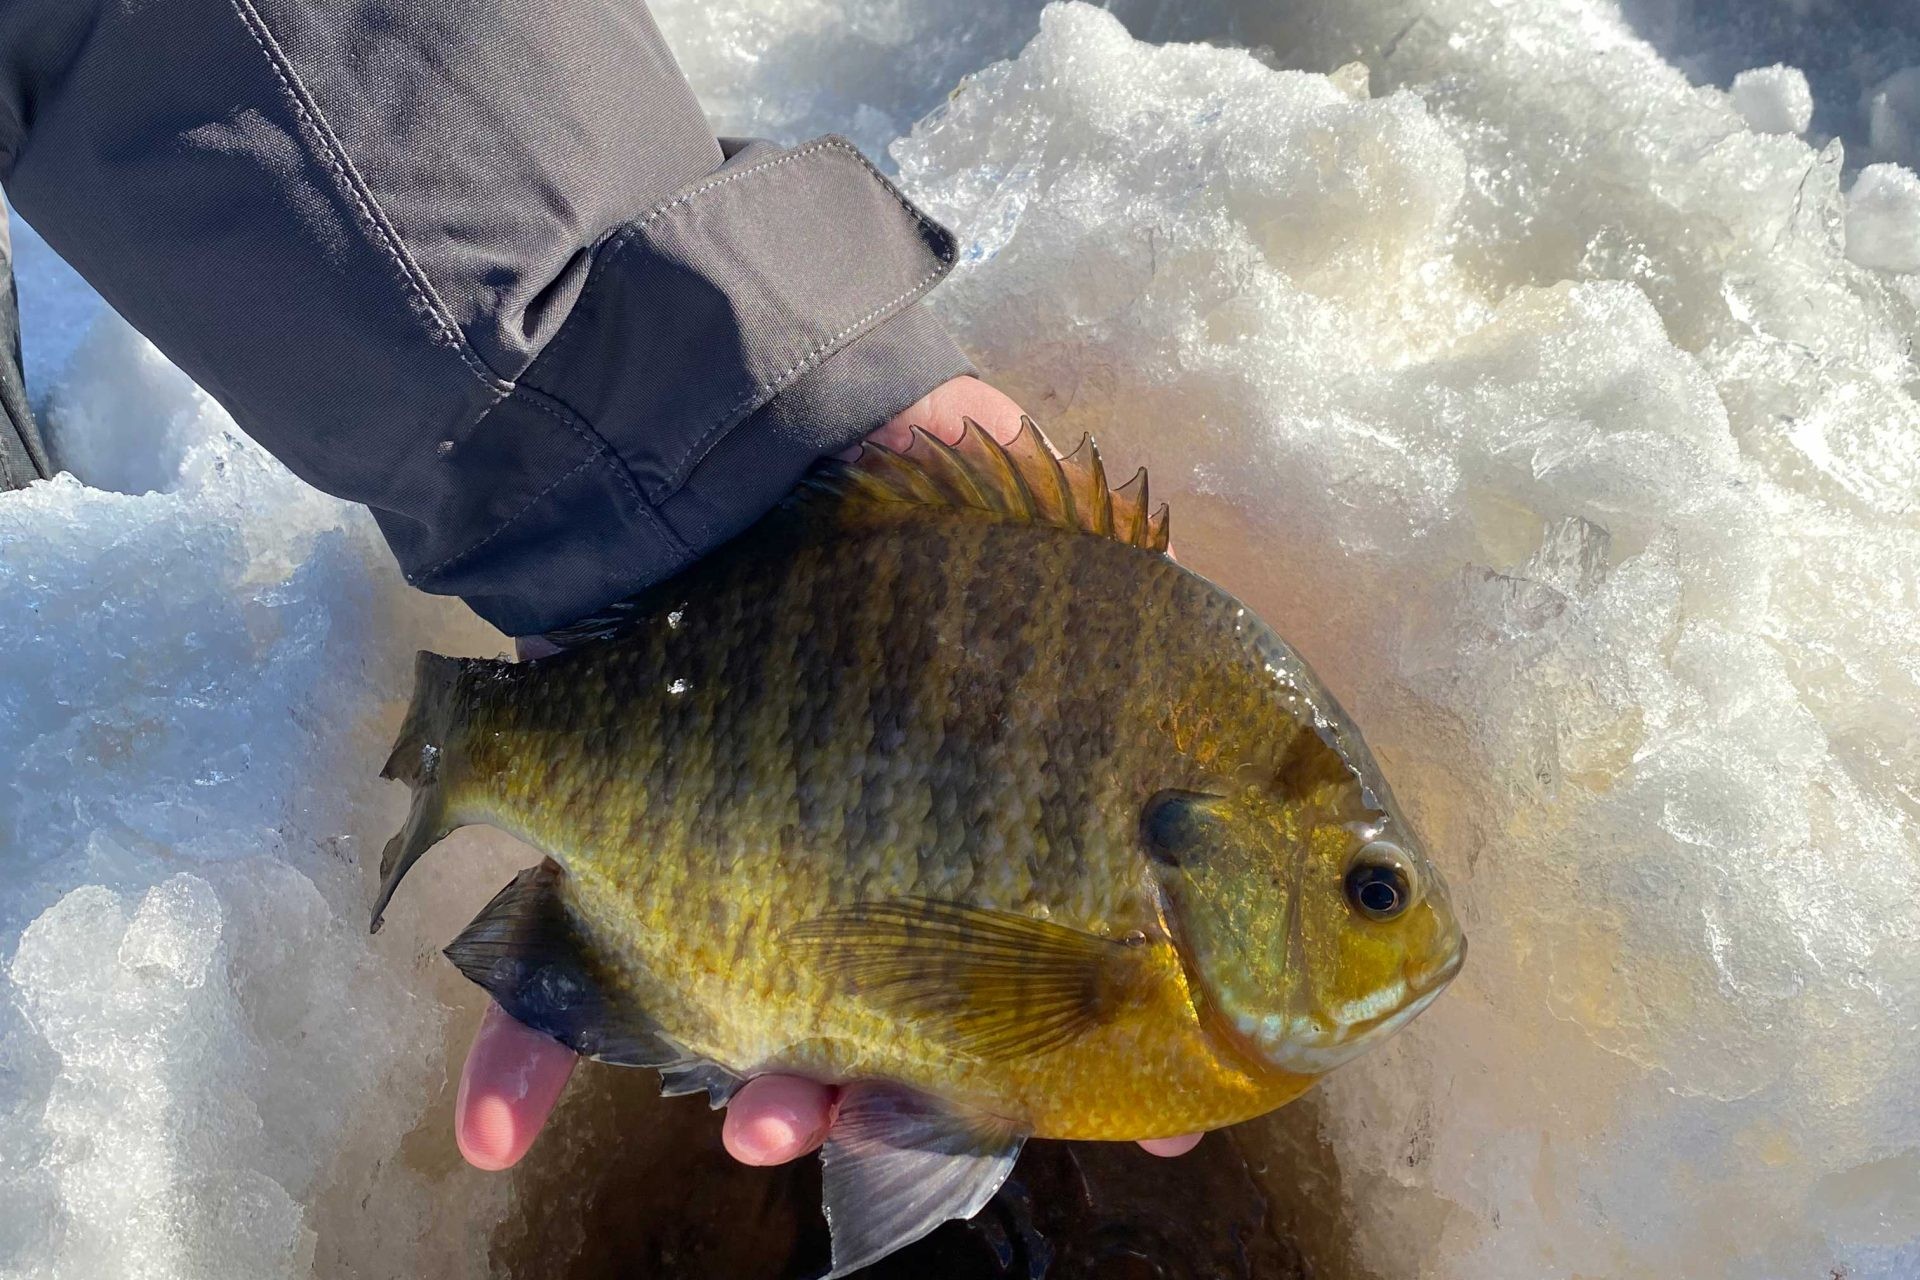 Scratch the Itch Early with Rainy Lake's Spring Bite - MidWest Outdoors